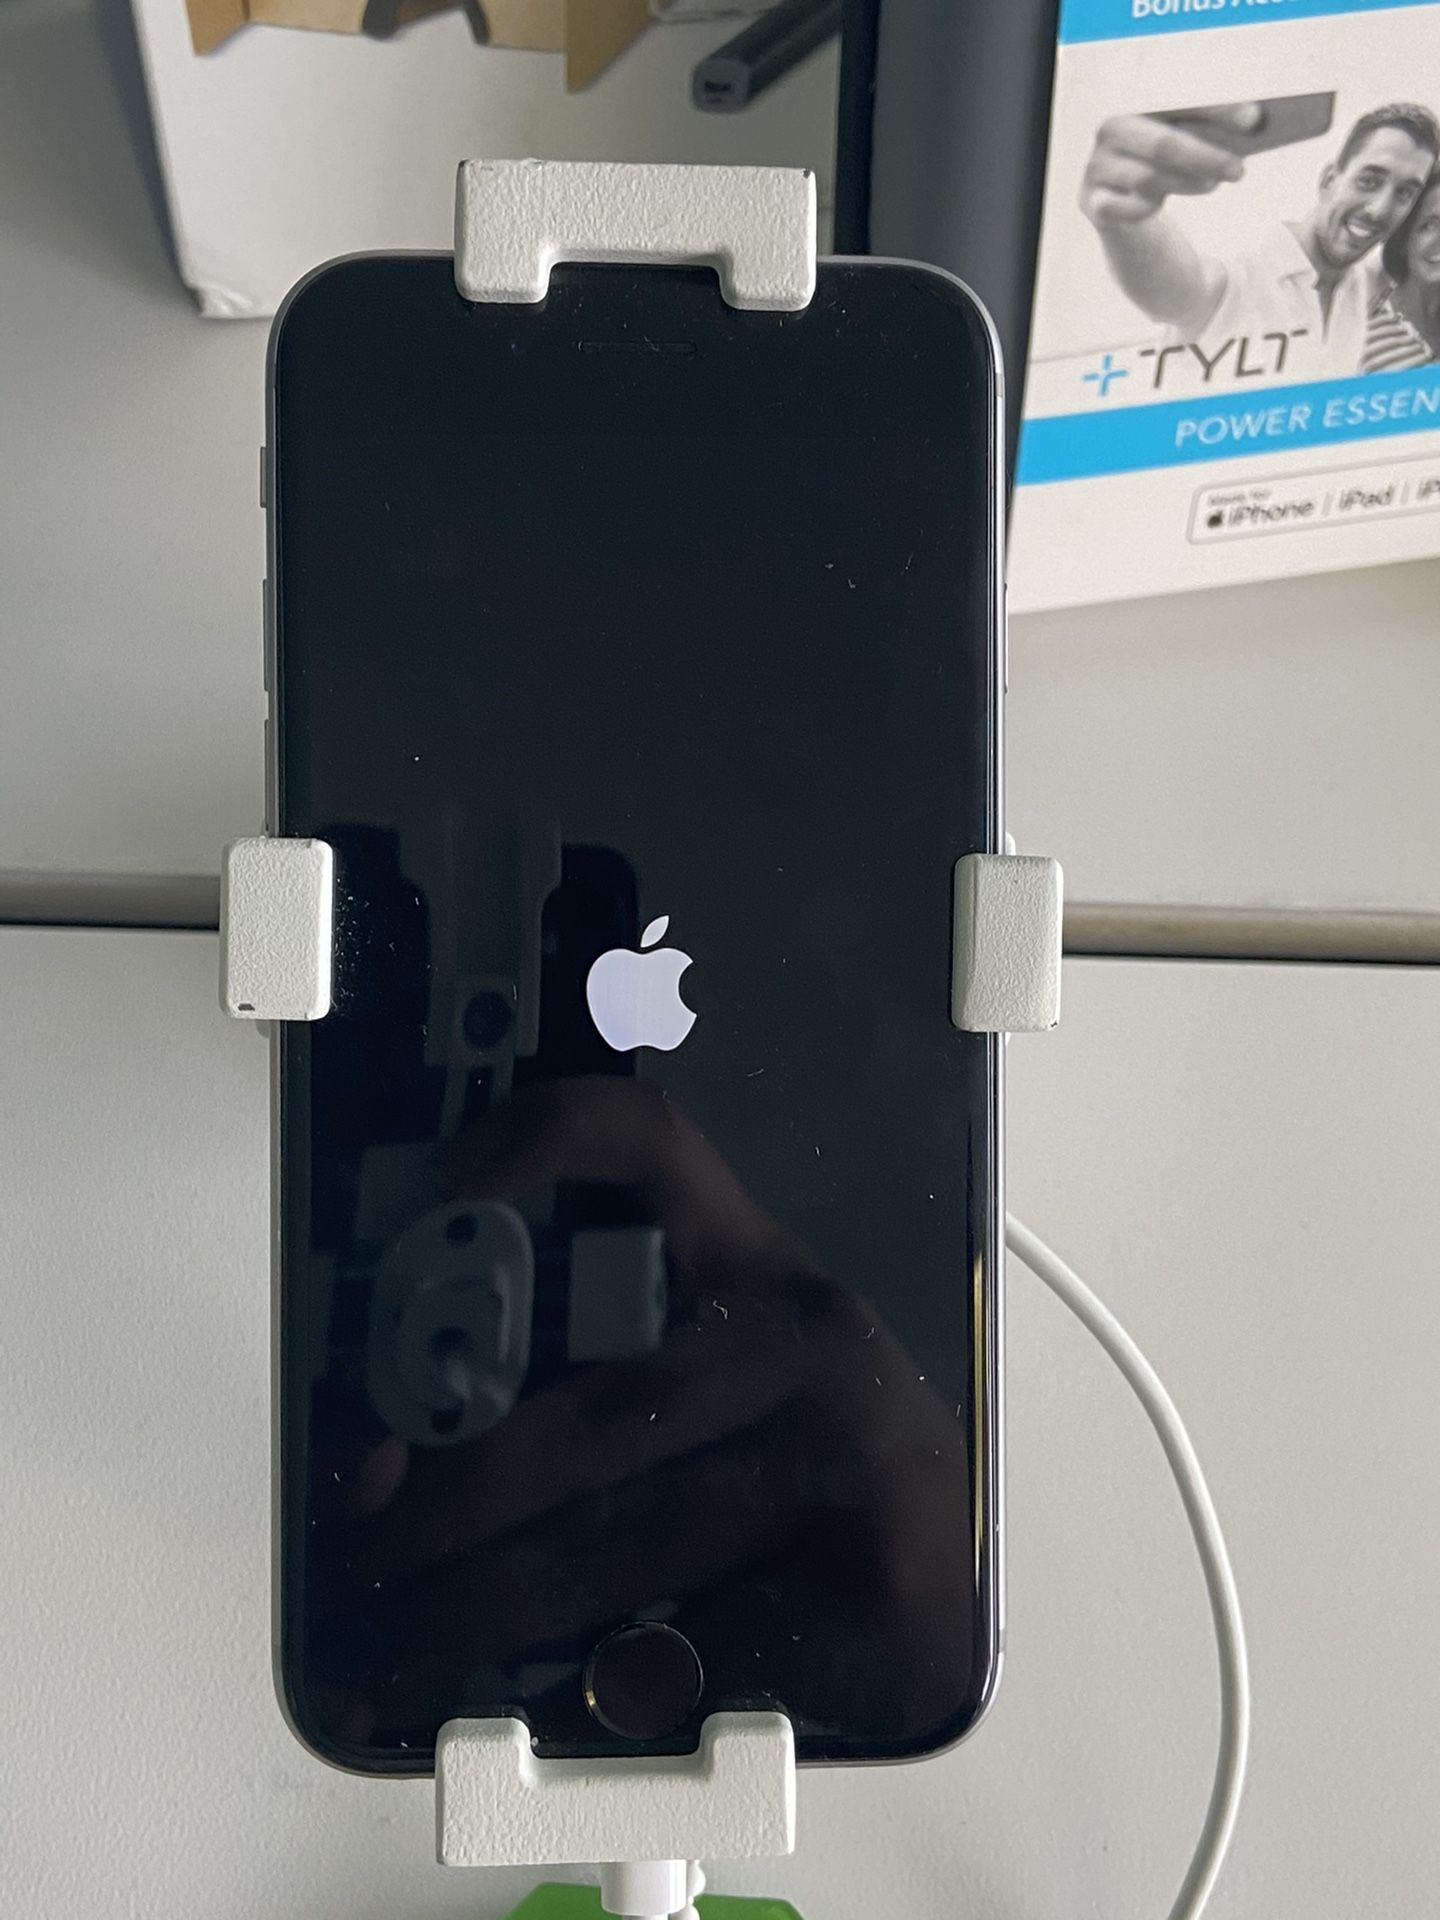 Brand New iPhone 6s for $50!